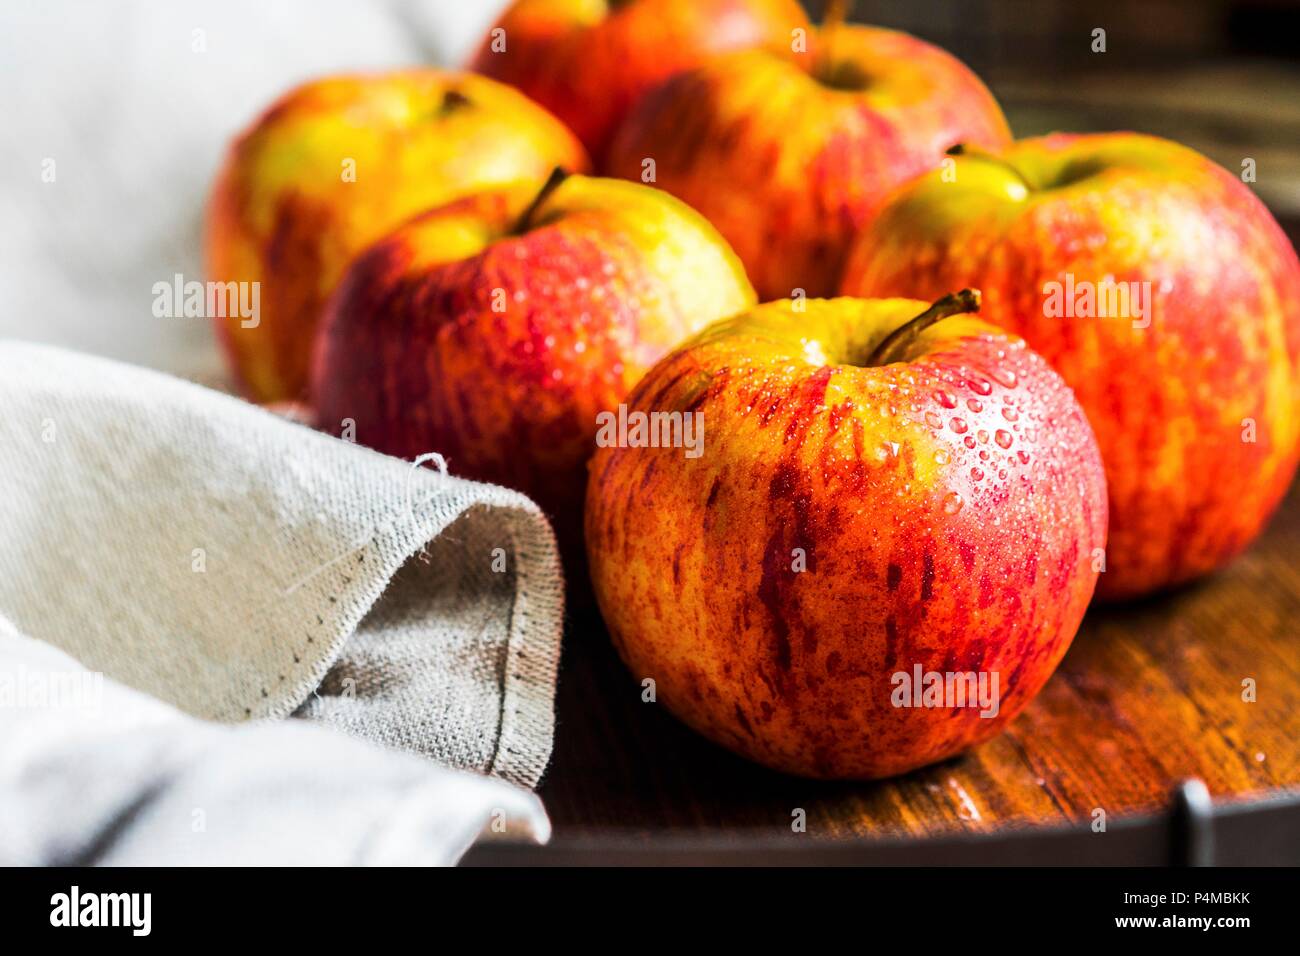 Fresh apples on a wooden surface Banque D'Images